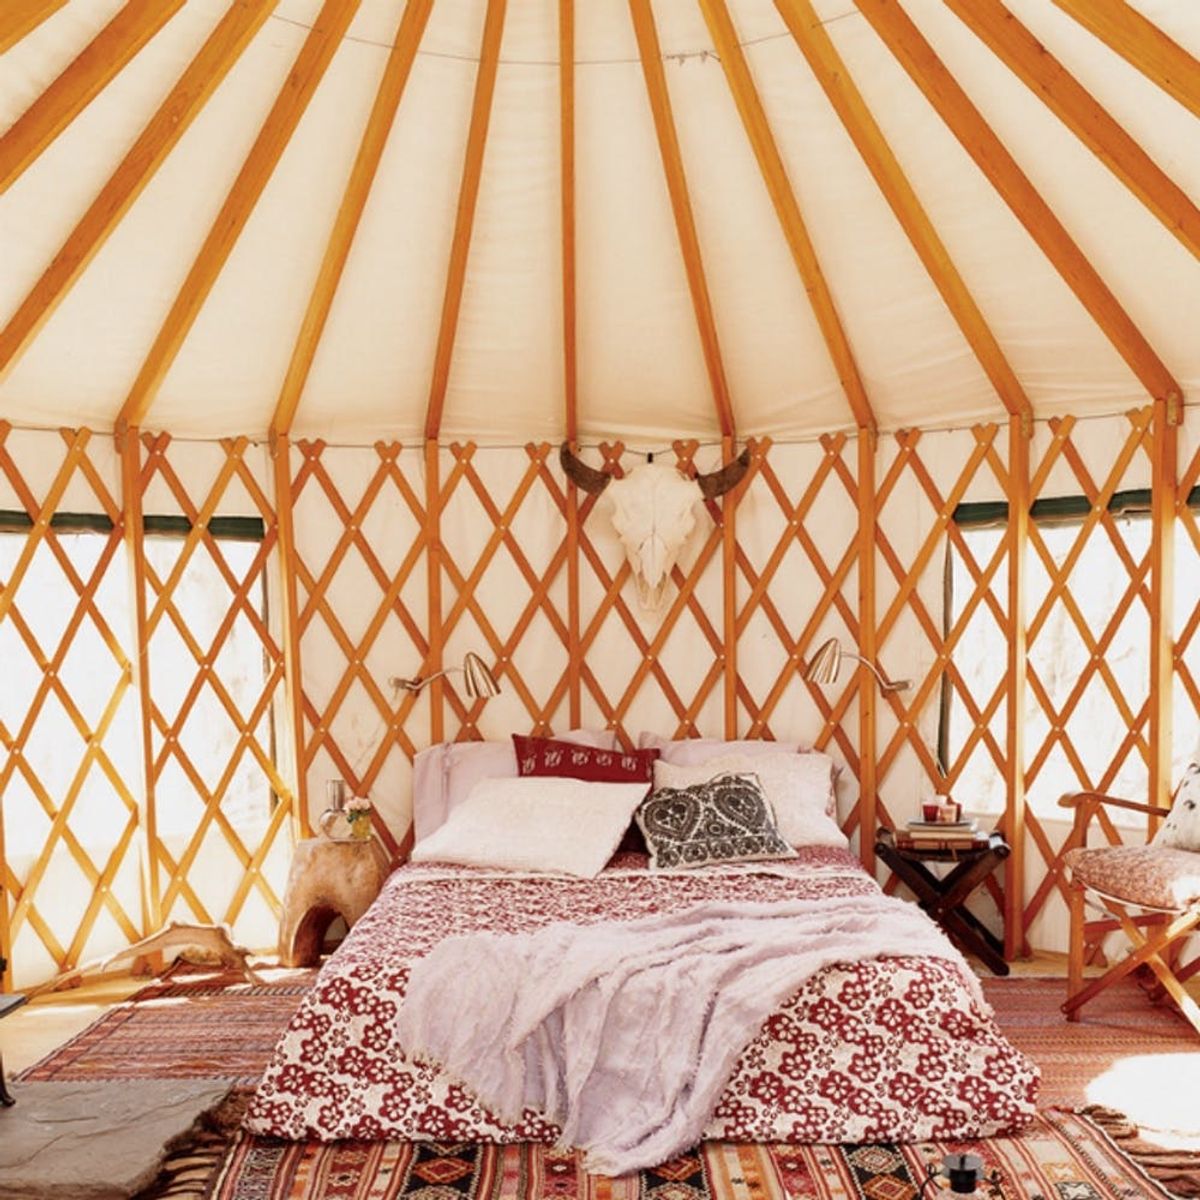 10 Modern Yurts You Could Totally Live In